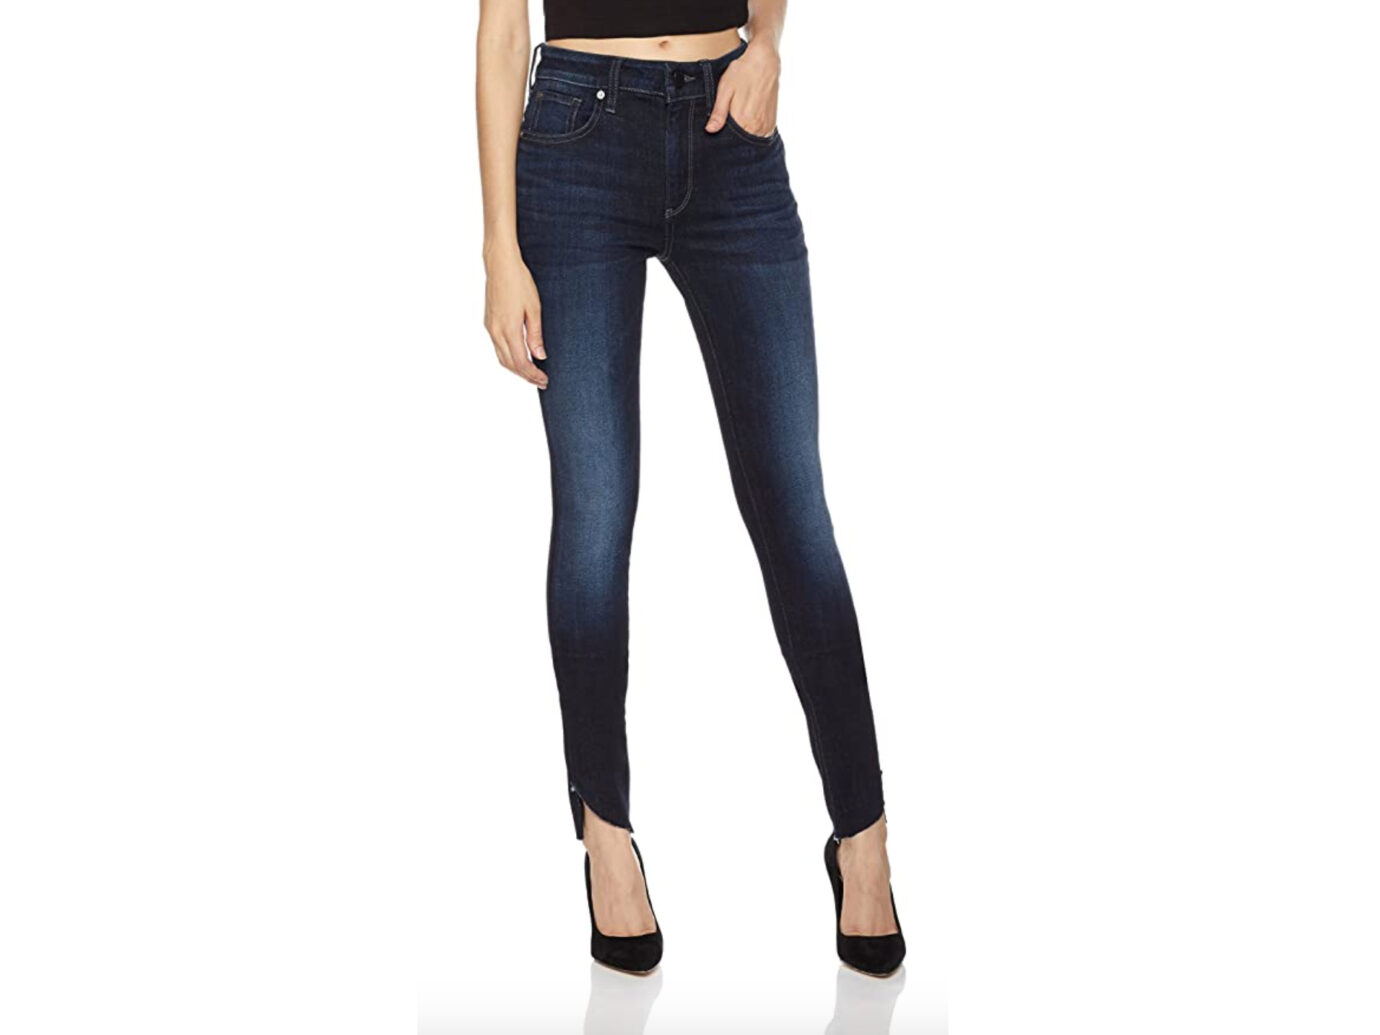 HALE Women's Rogue Stunner Mid Rise Skinny Jean with Step Hem